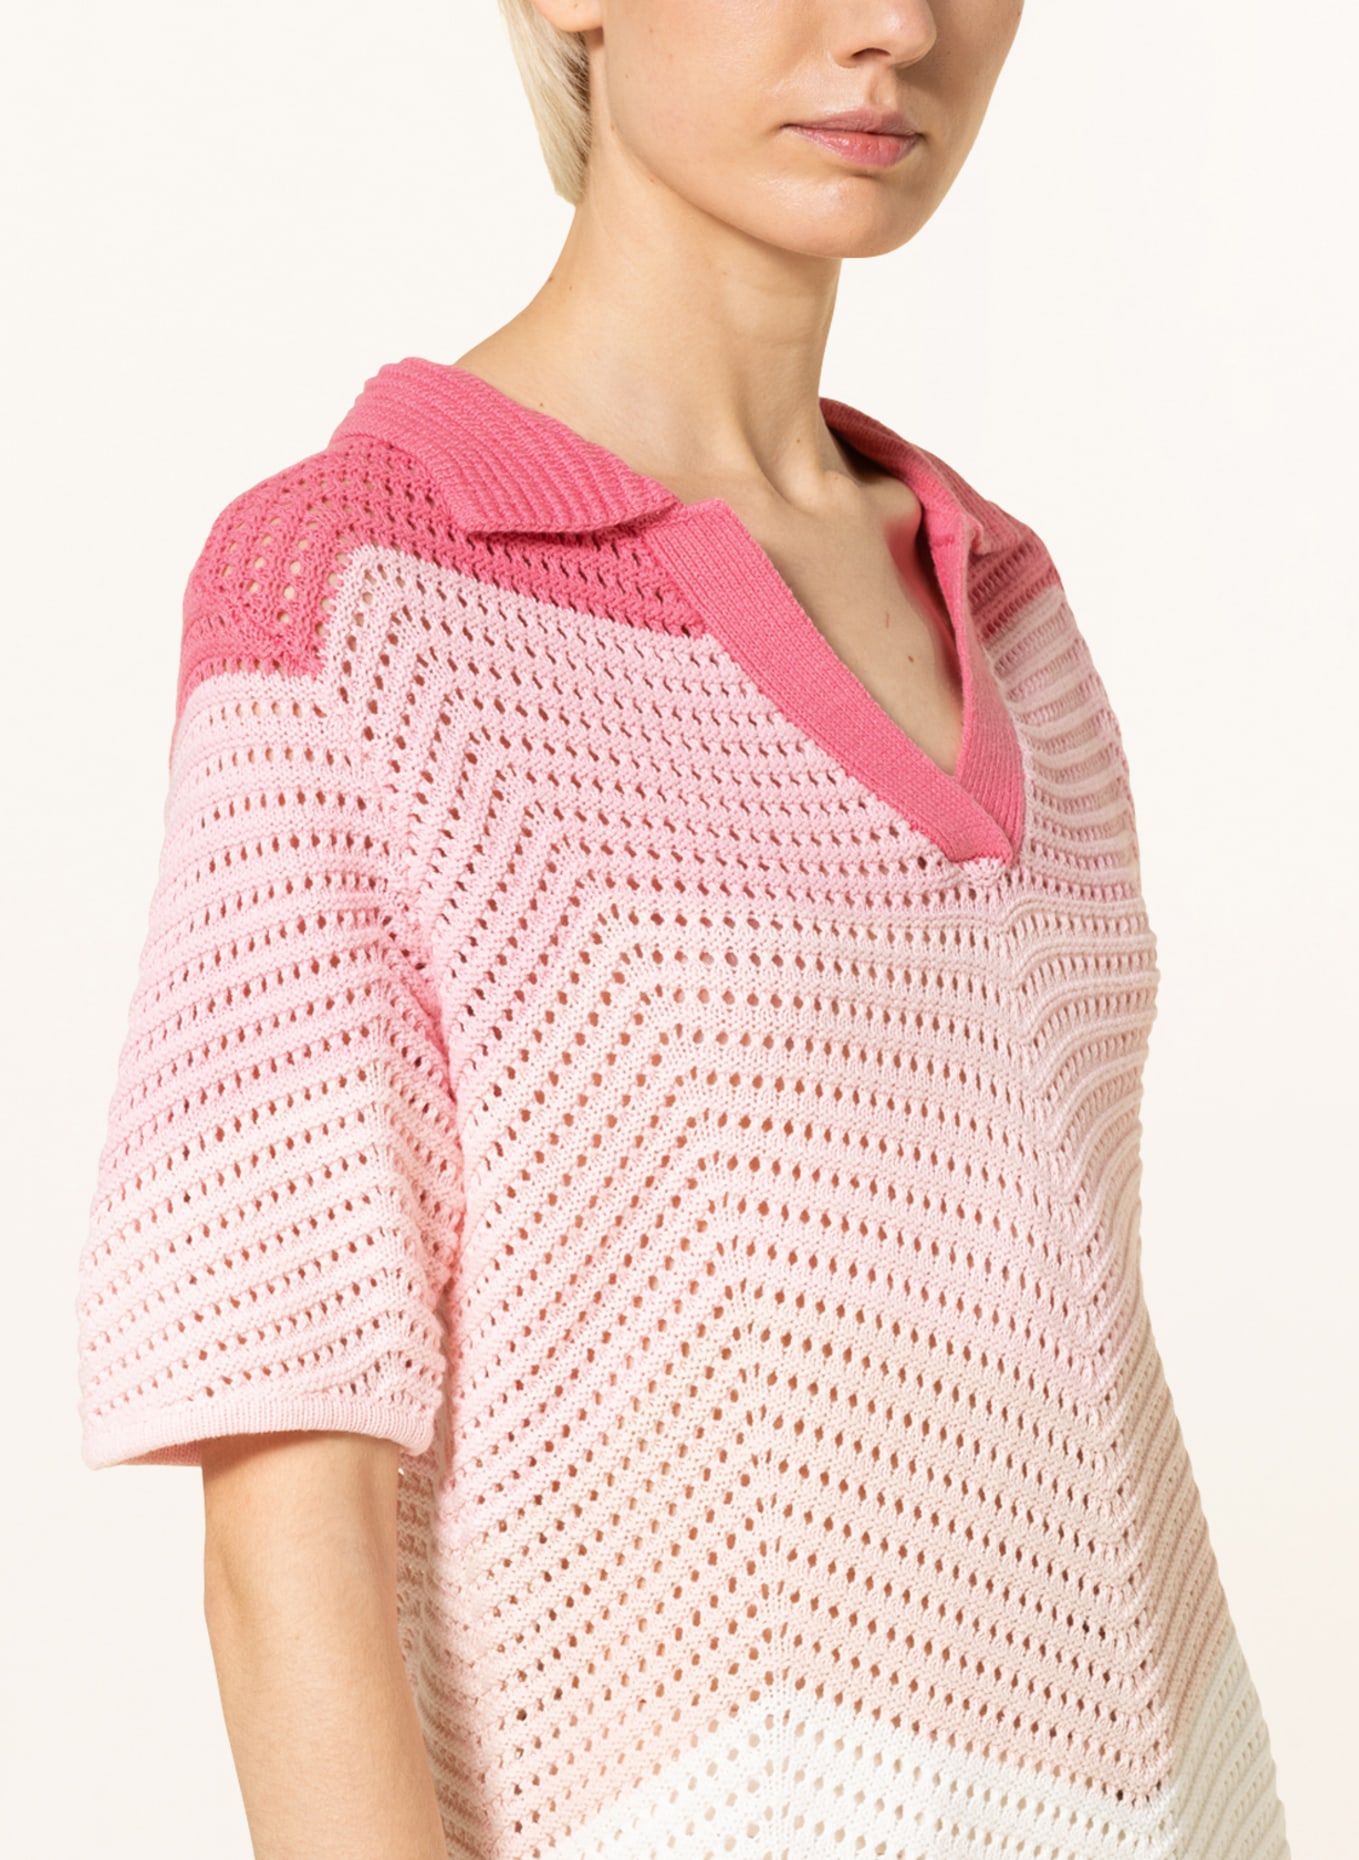 Princess GOES HOLLYWOOD Knitted polo shirt, Color: PINK/ LIGHT PINK/ ECRU (Image 4)